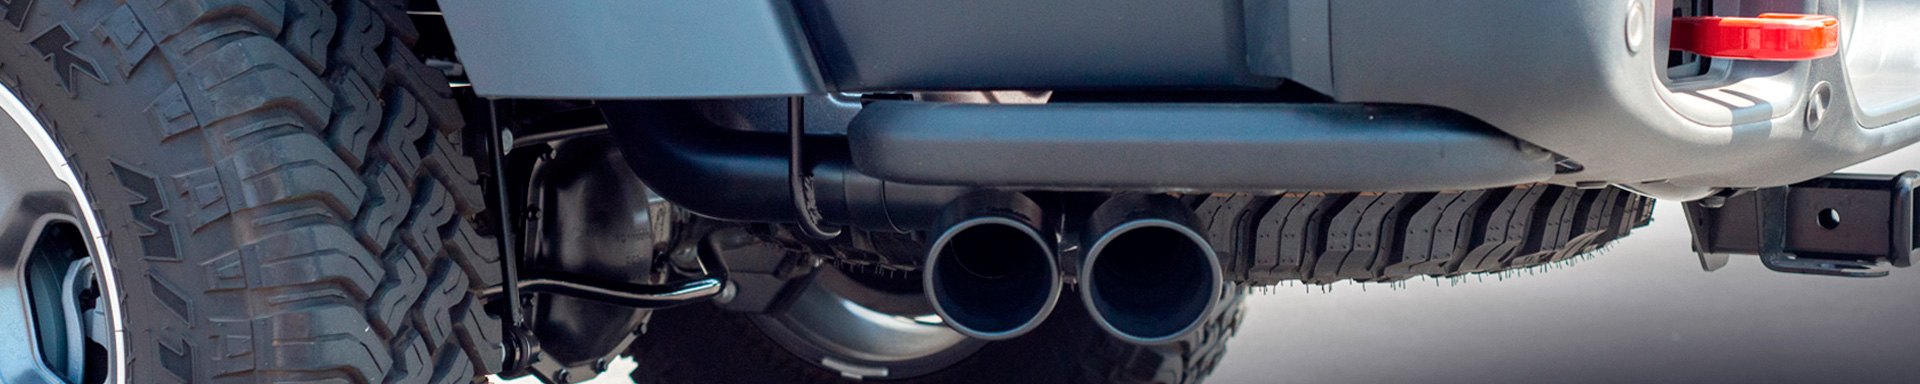 Get 7-10% Power Increase With All-New Borla Exhausts For JT